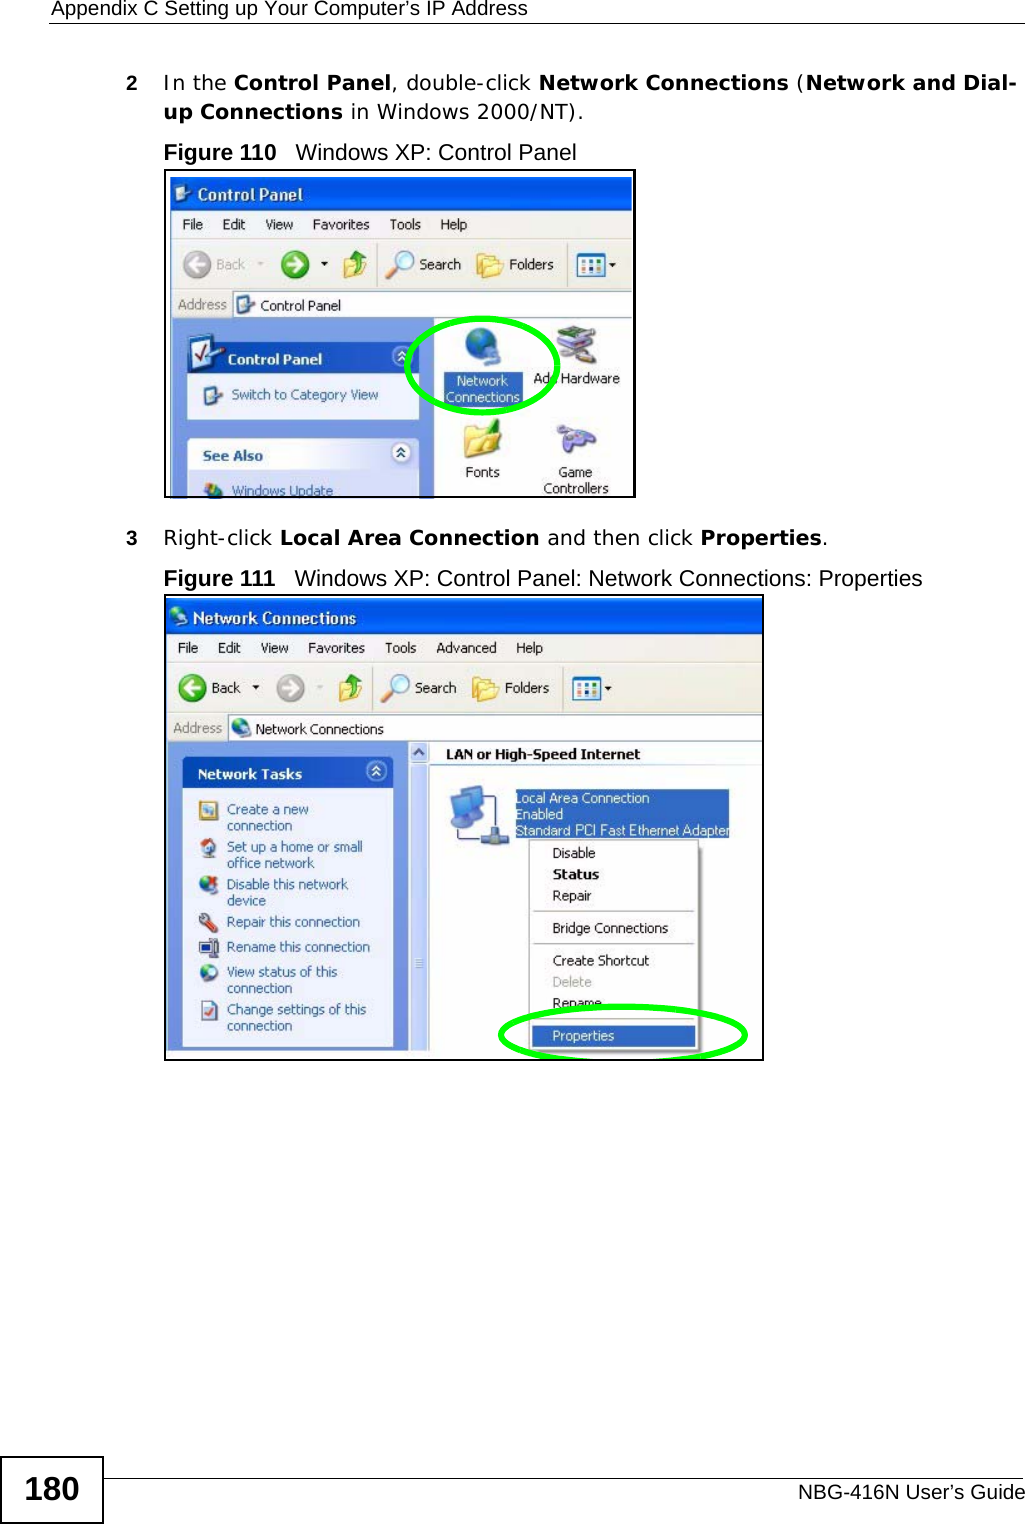 Appendix C Setting up Your Computer’s IP AddressNBG-416N User’s Guide1802In the Control Panel, double-click Network Connections (Network and Dial-up Connections in Windows 2000/NT).Figure 110   Windows XP: Control Panel3Right-click Local Area Connection and then click Properties.Figure 111   Windows XP: Control Panel: Network Connections: Properties